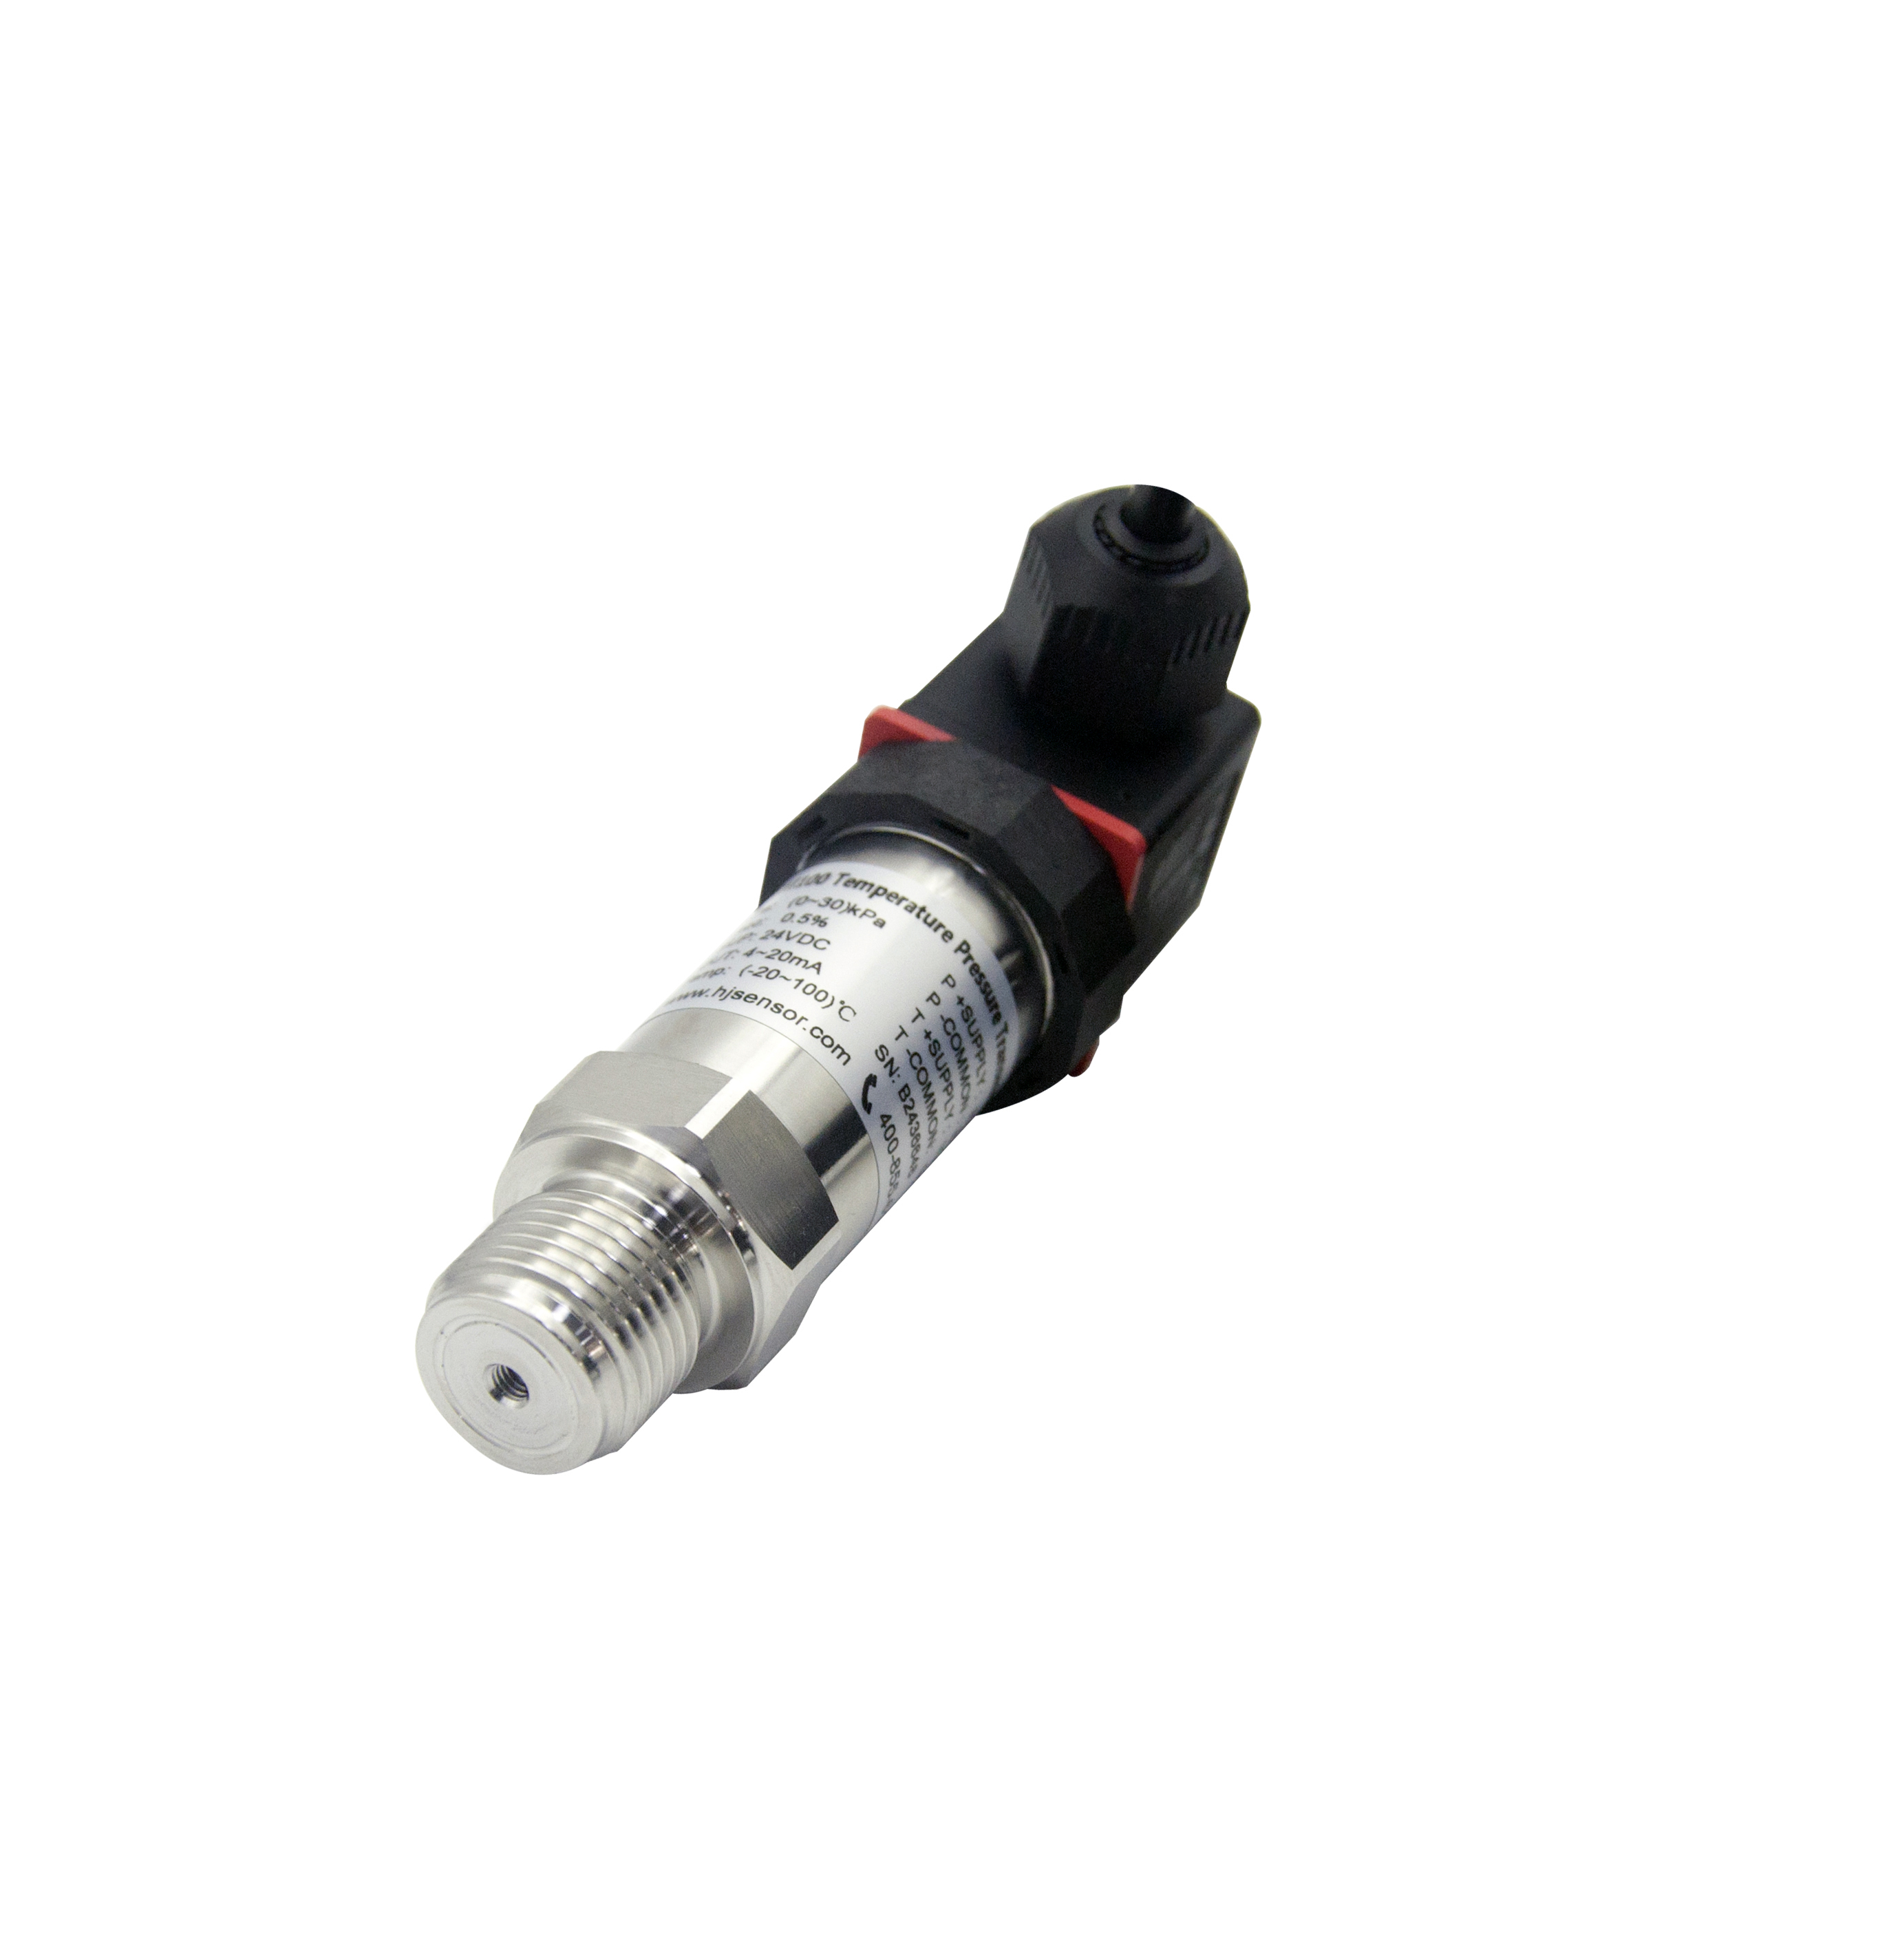 HPTM100 Temperature and pressure integrated transmitter